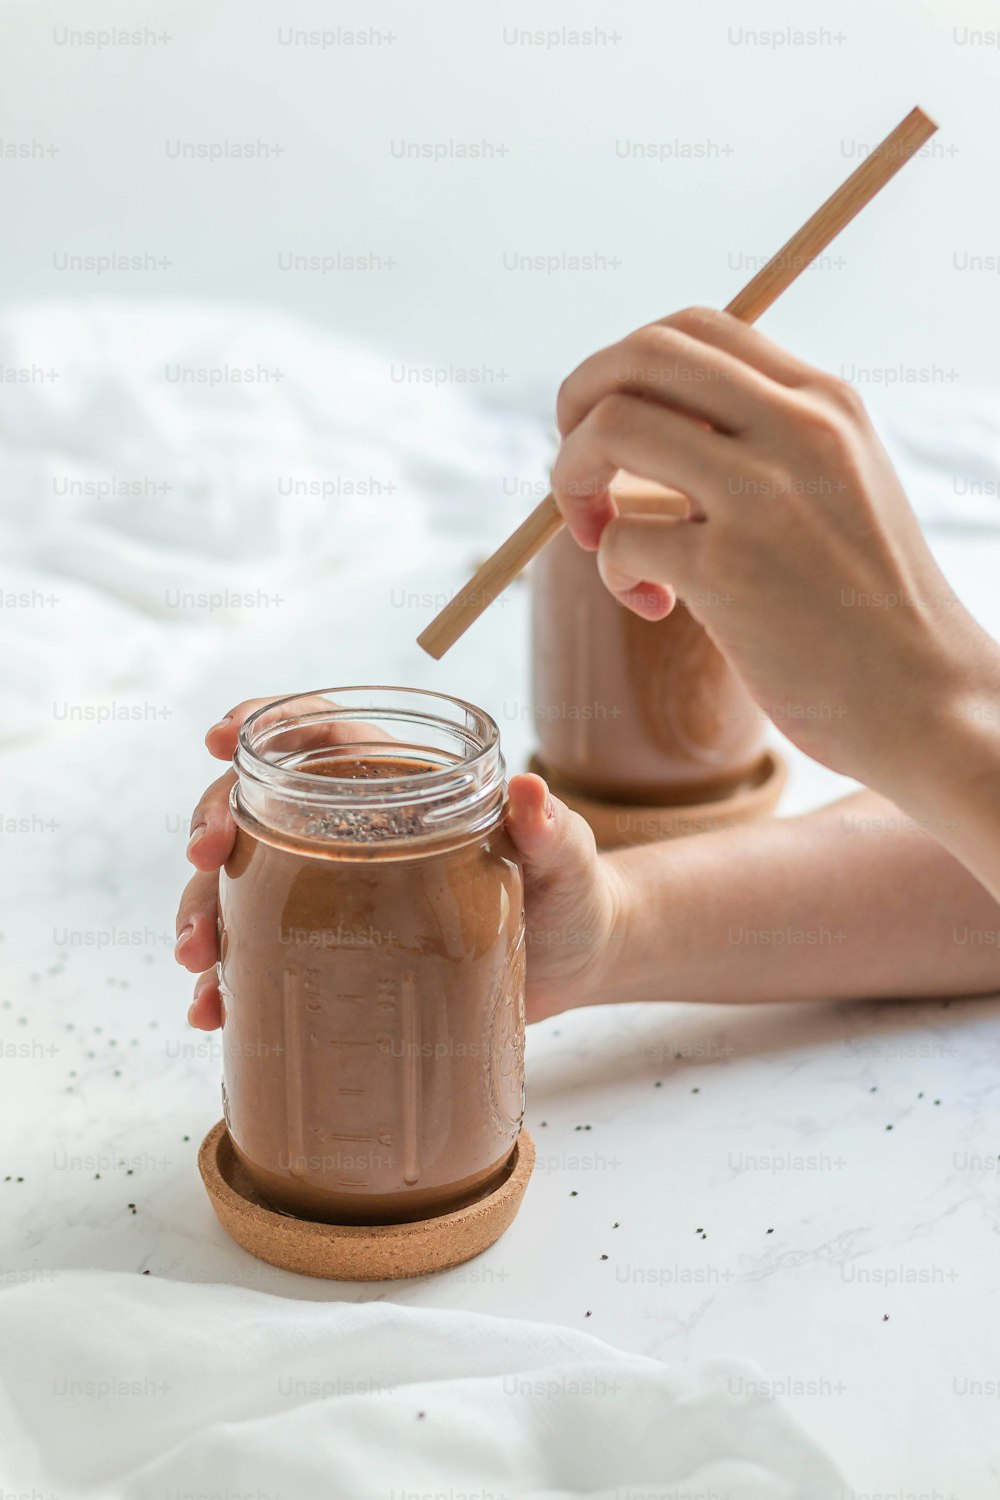 a person is holding a jar of chocolate